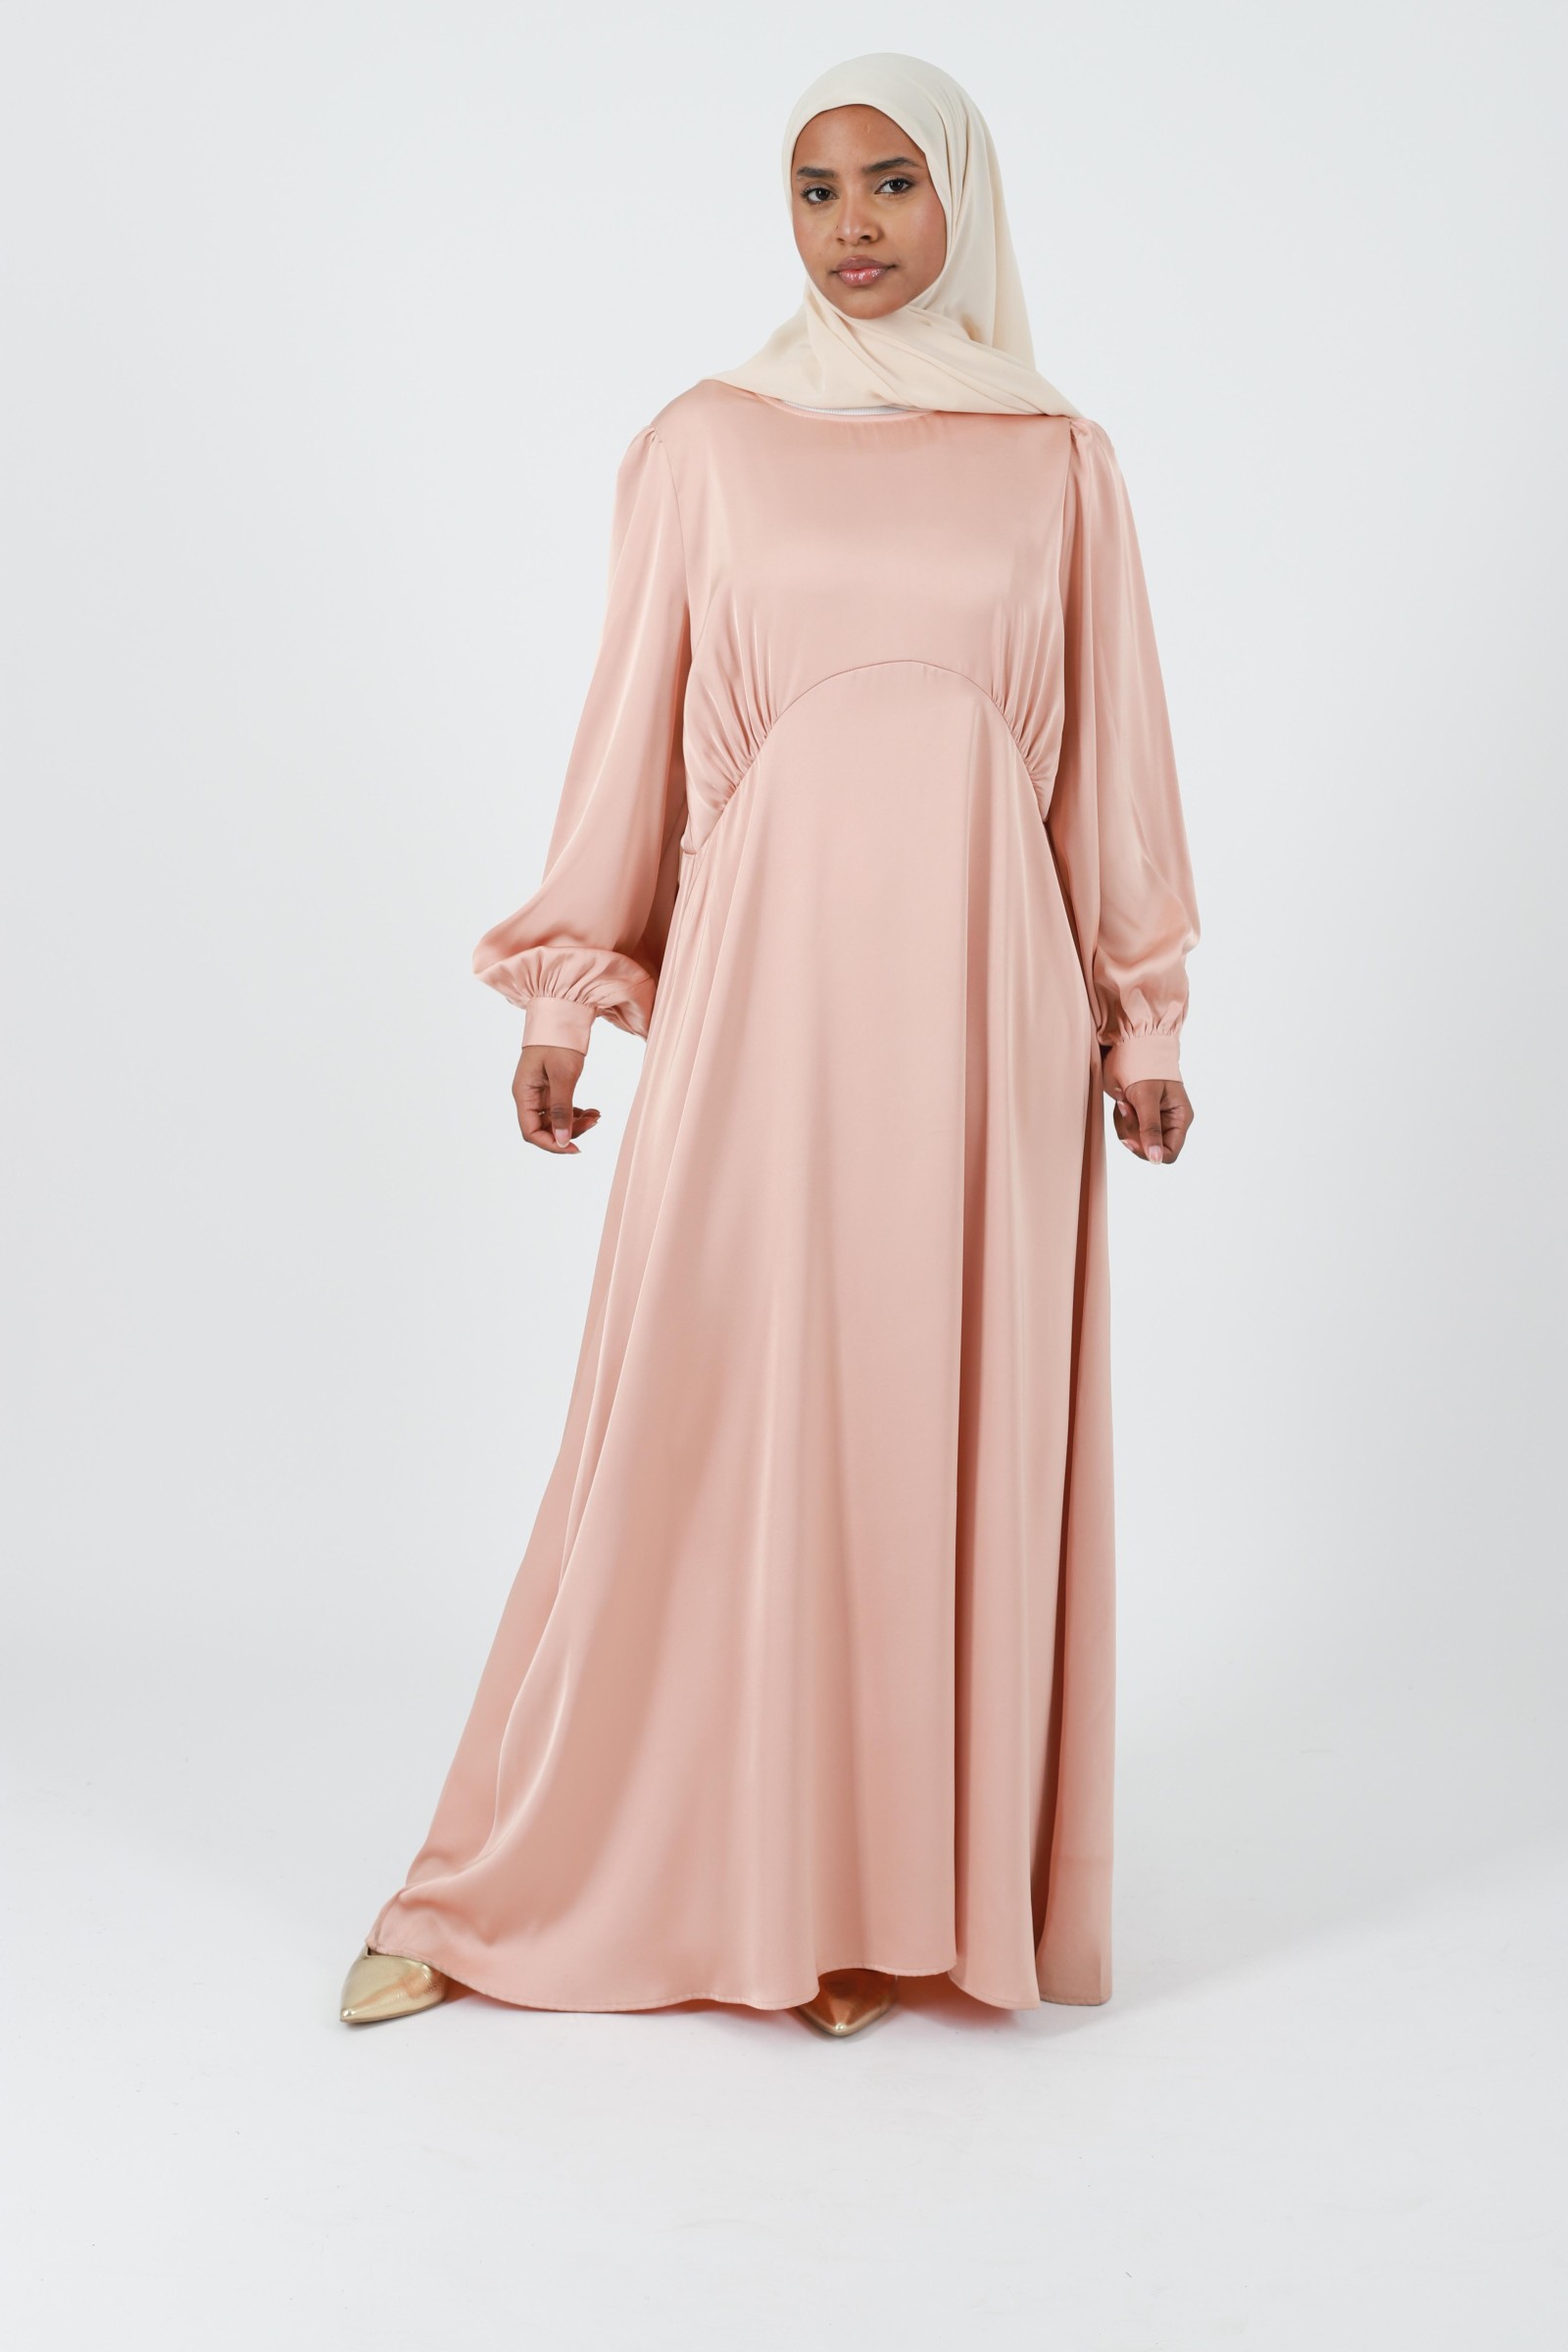 Simple and chic party abaya for Muslim women